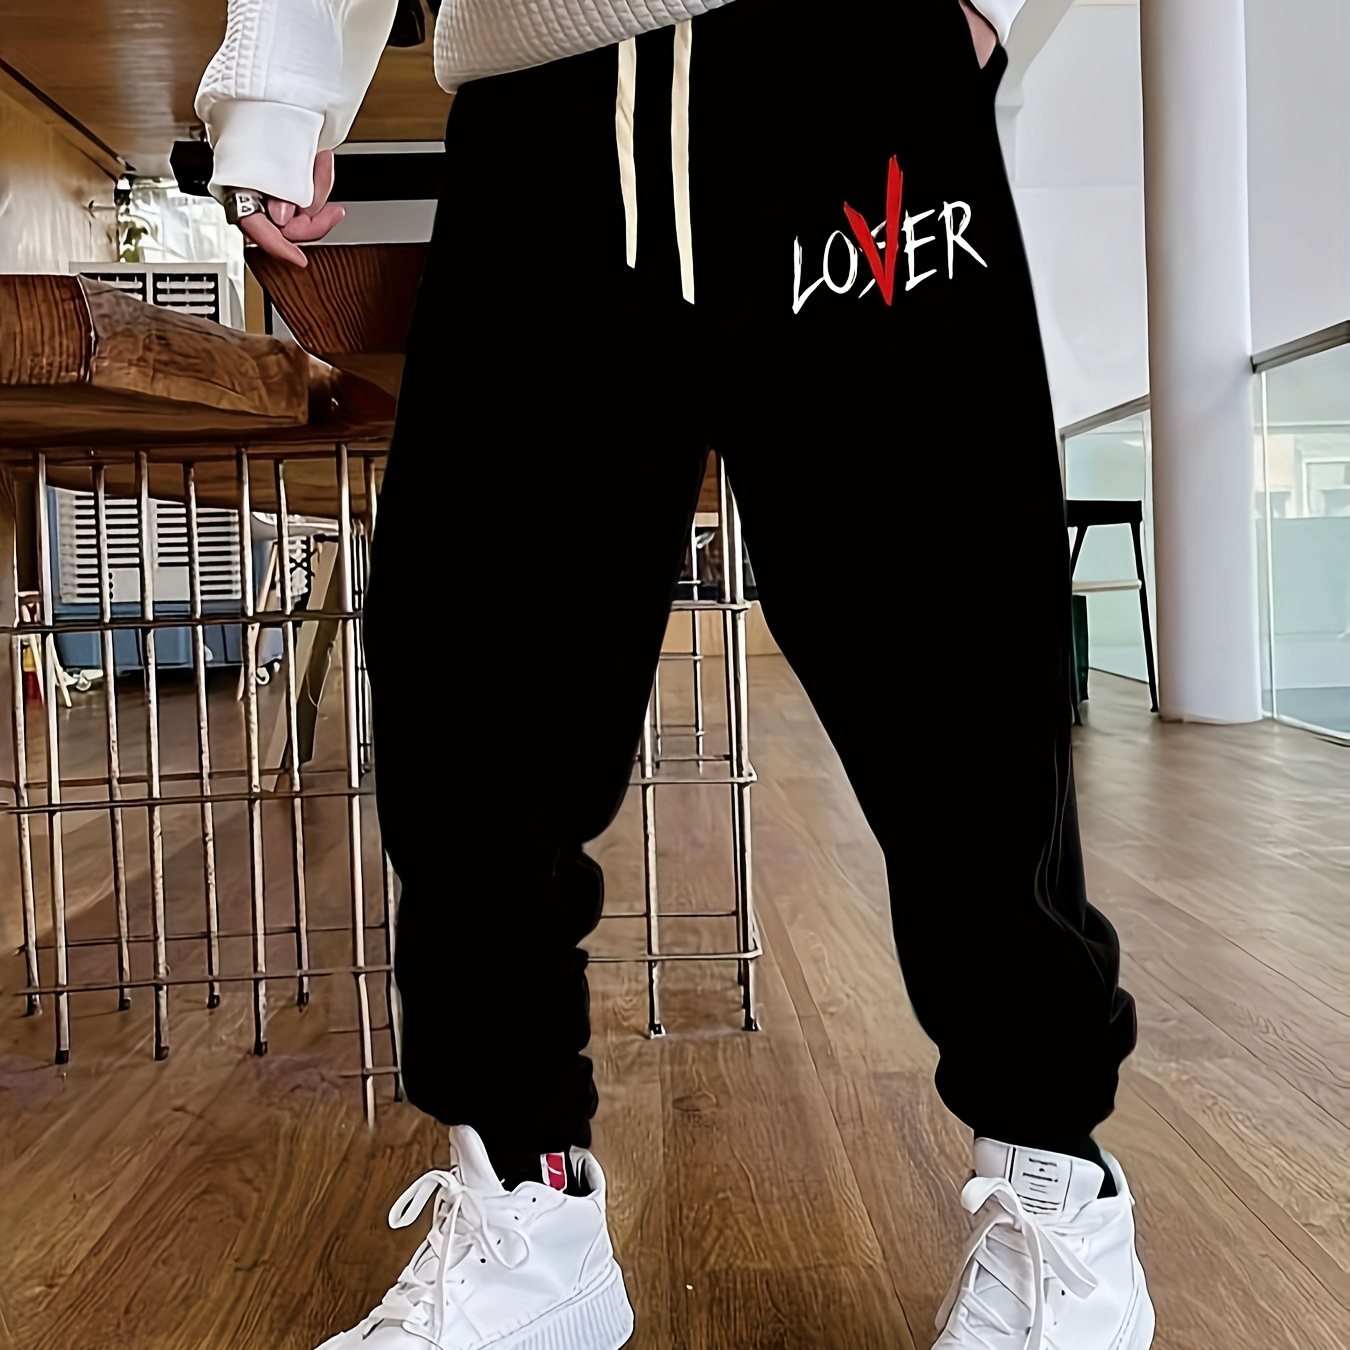 

Lover Print Men's Pants Drawstring Sweatpants Loose Casual Trousers For Spring Autumn Running Jogging